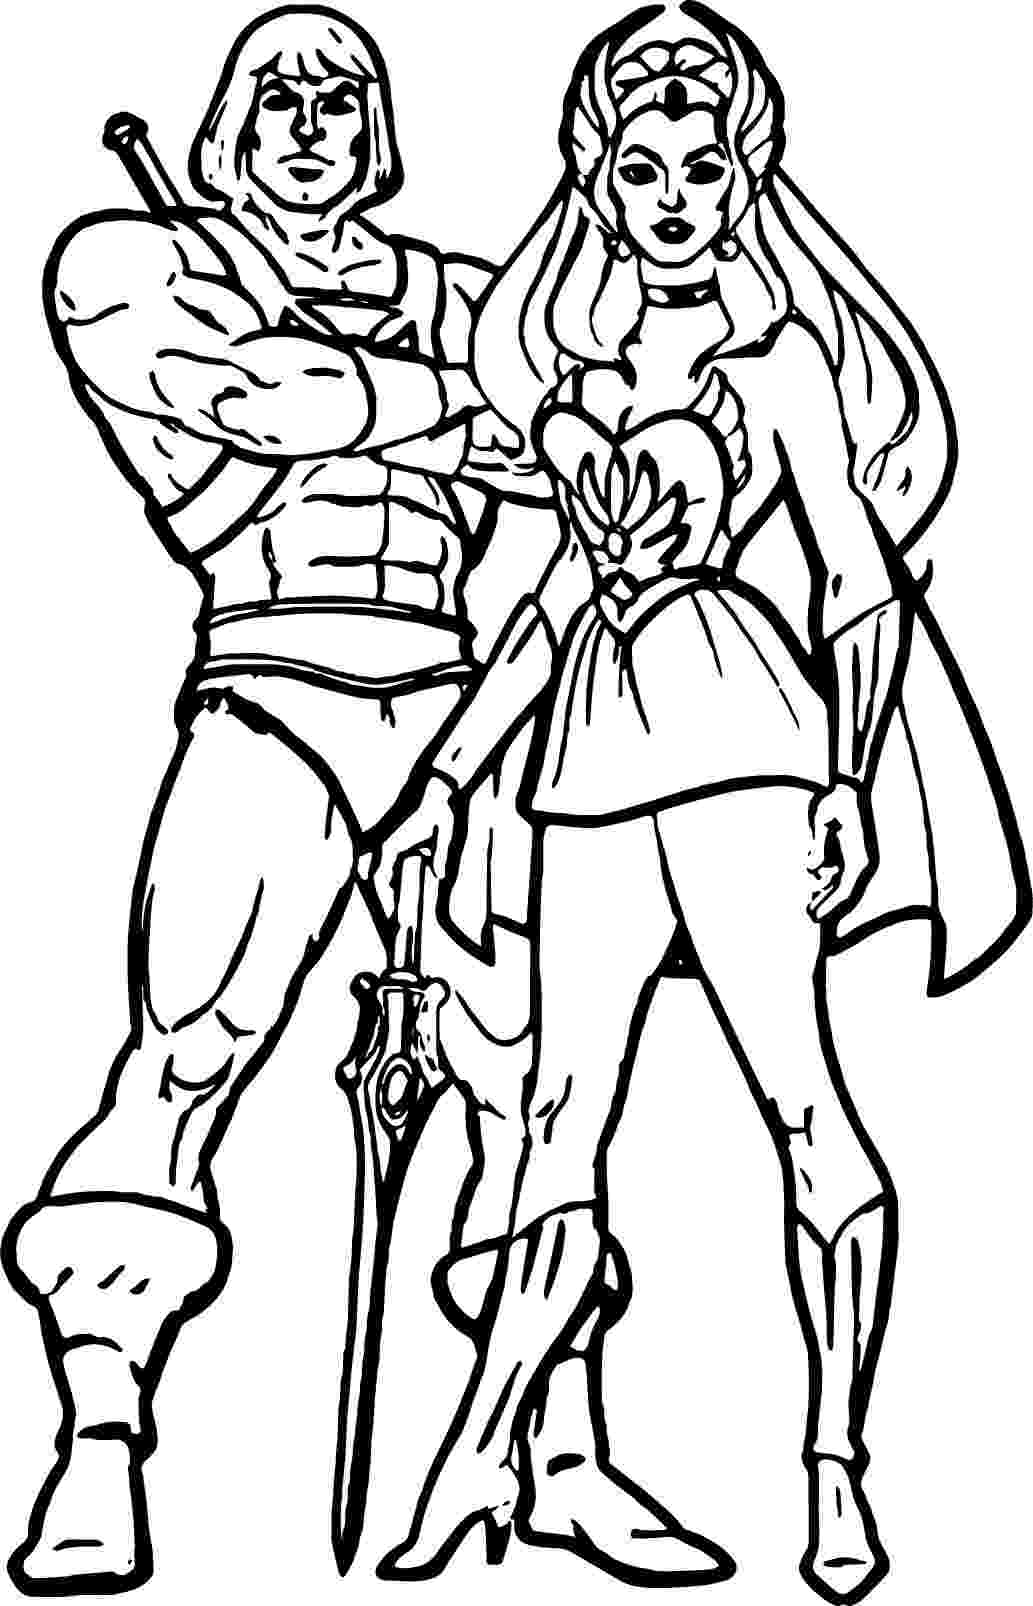 he man coloring pages he man immagini da colorare man pages he coloring 